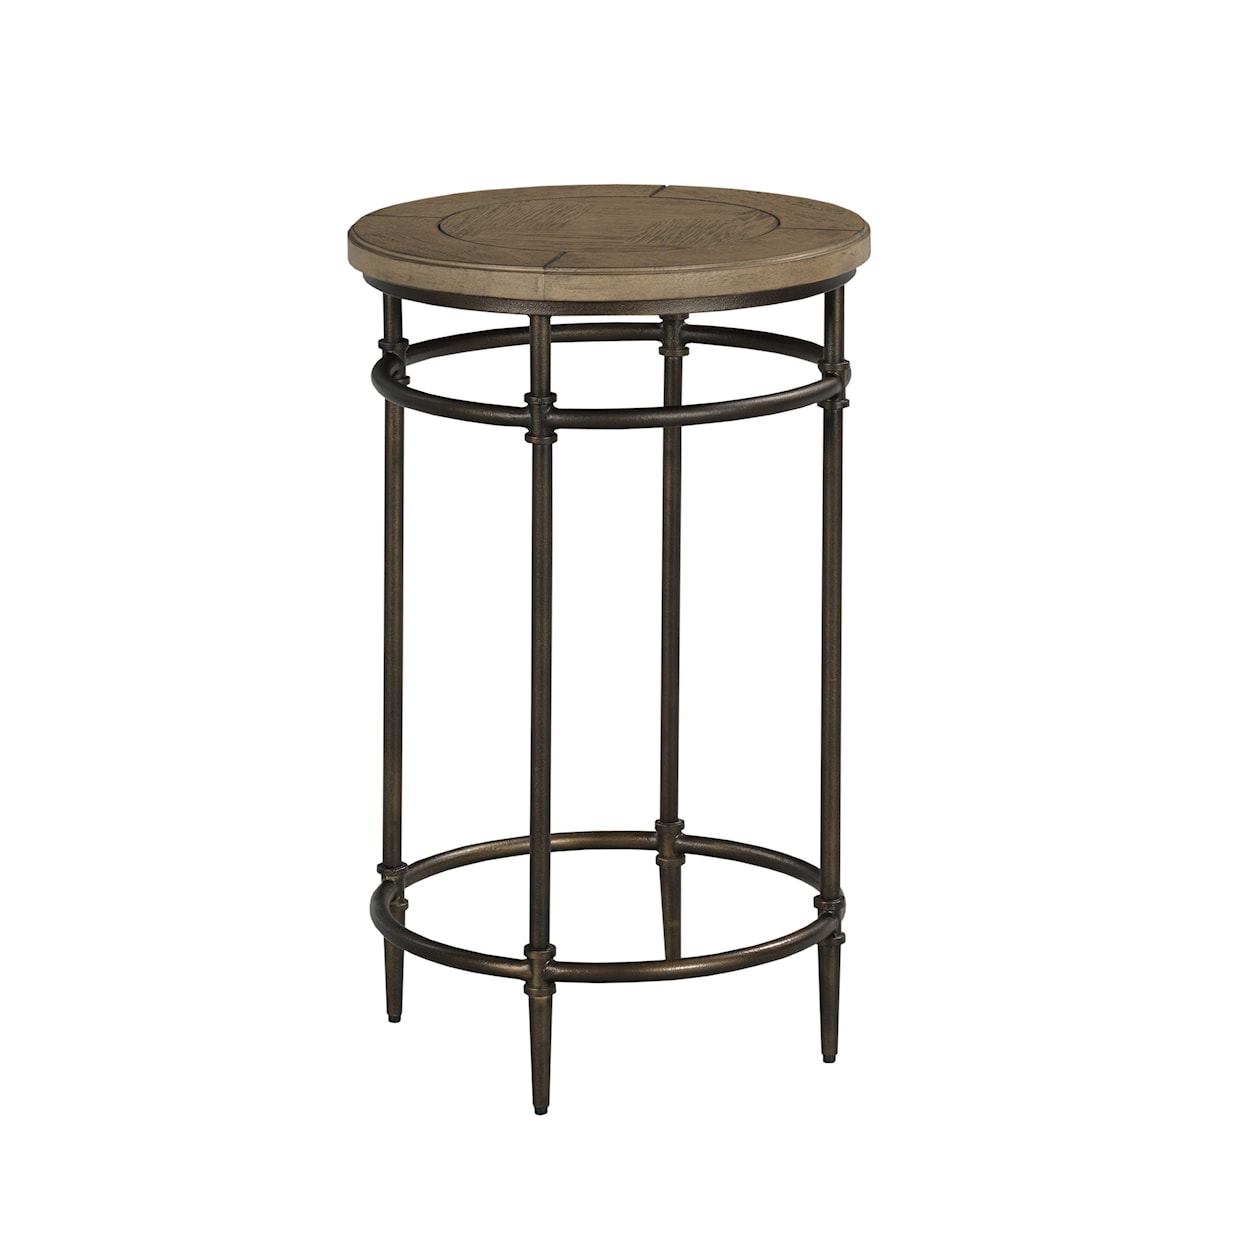 Tennessee Custom Upholstery Crossroads Round Chairside Table